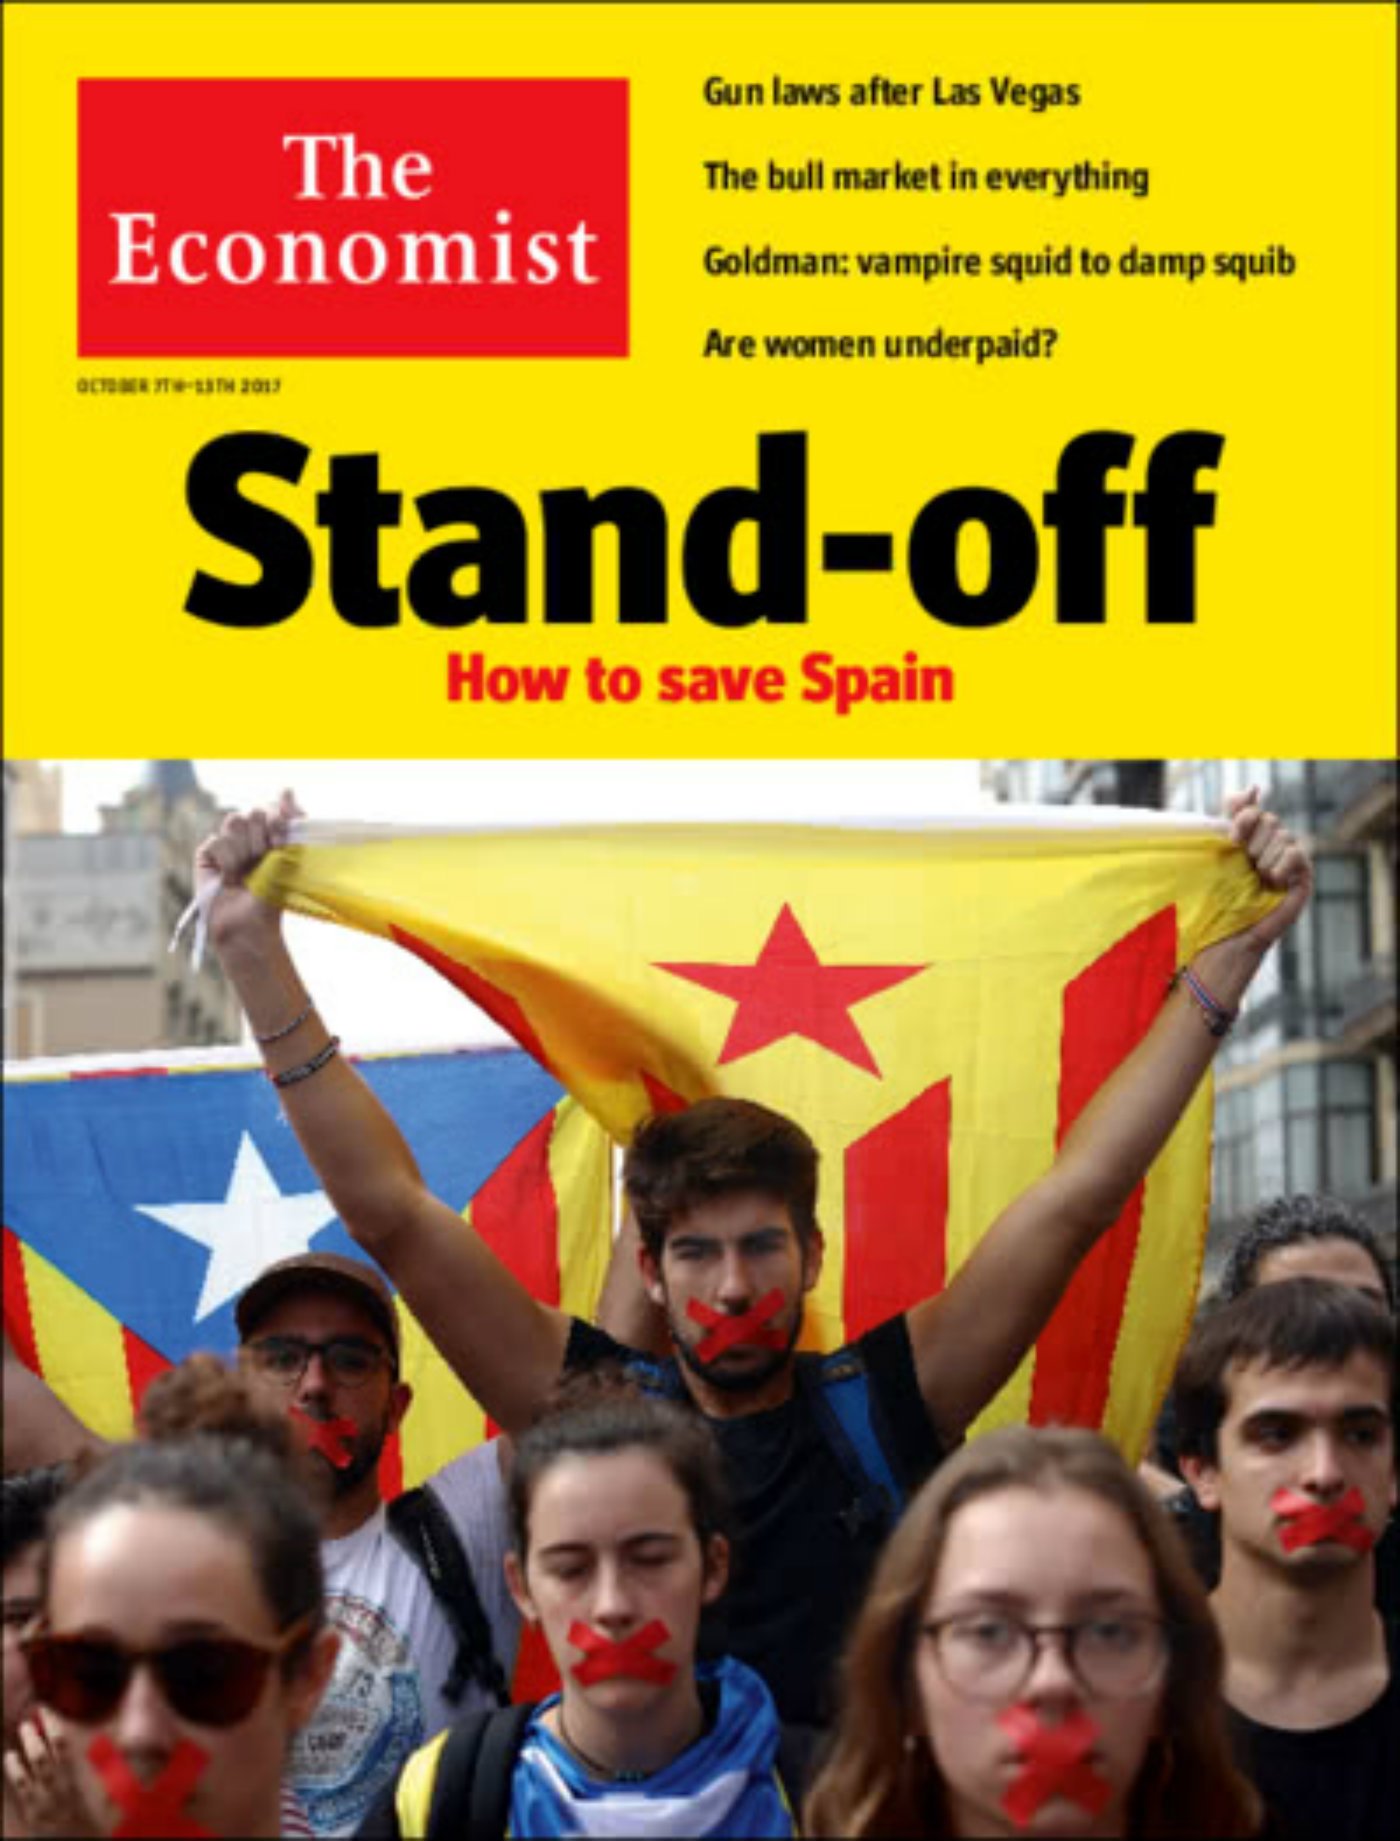 'The Economist': "Any settlement must include the option of a referendum on independence"